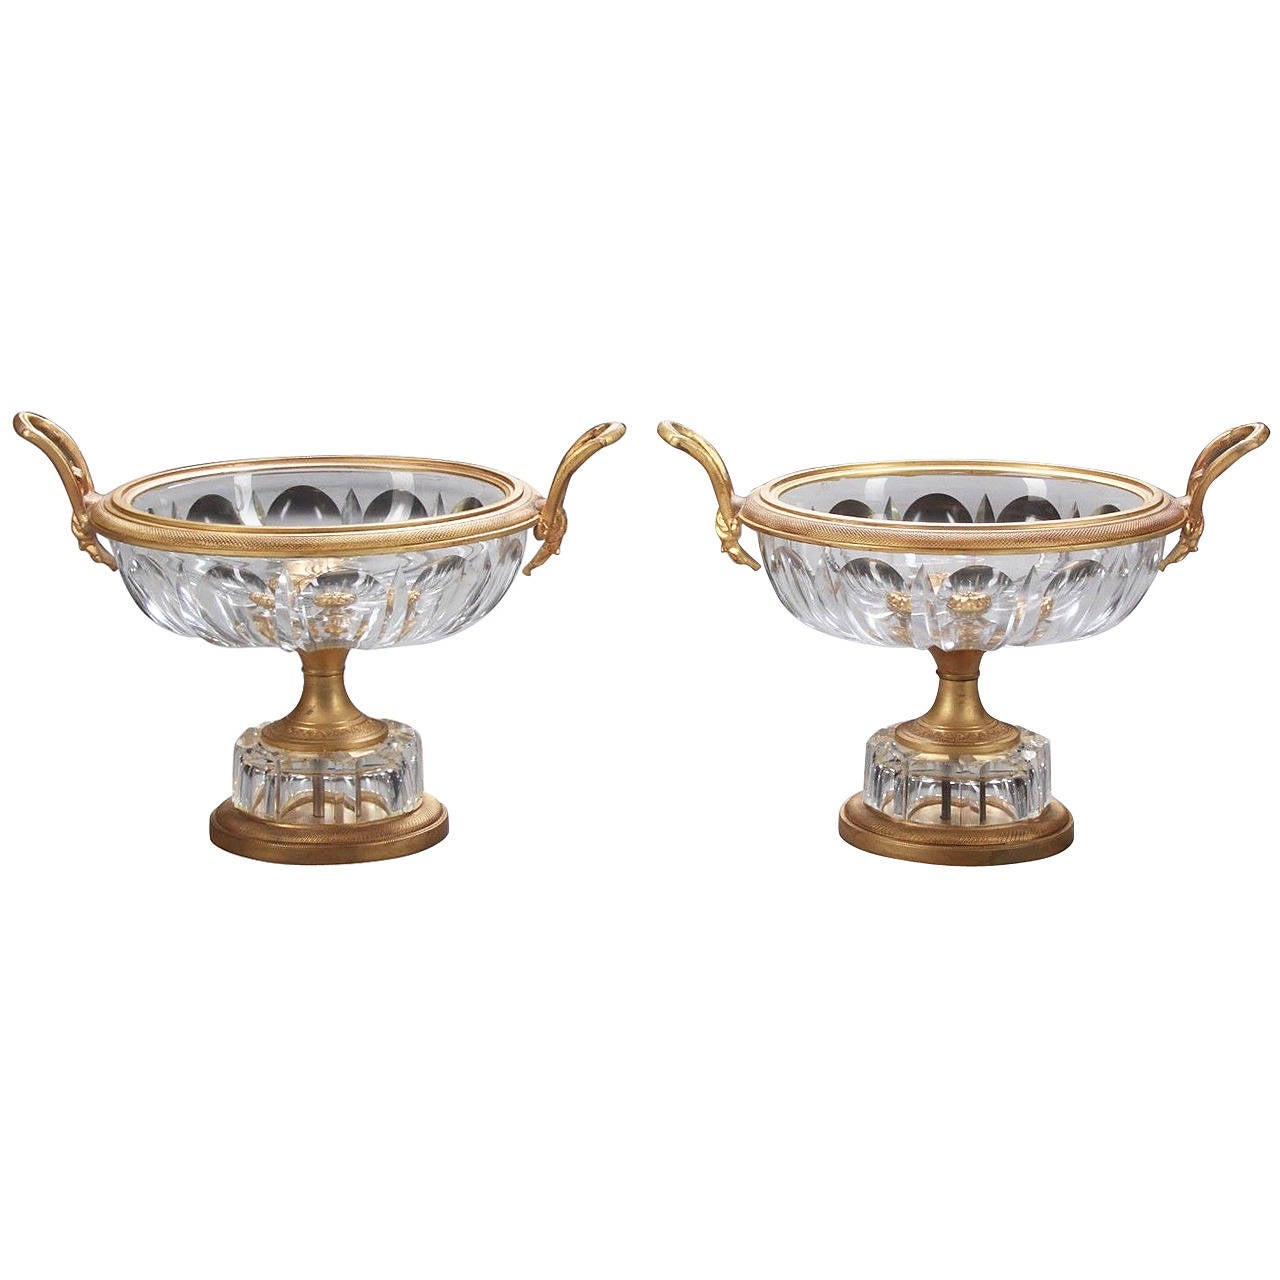 Pair of Early 20th Century French Gilt Bronze and Cut Crystal Compotes